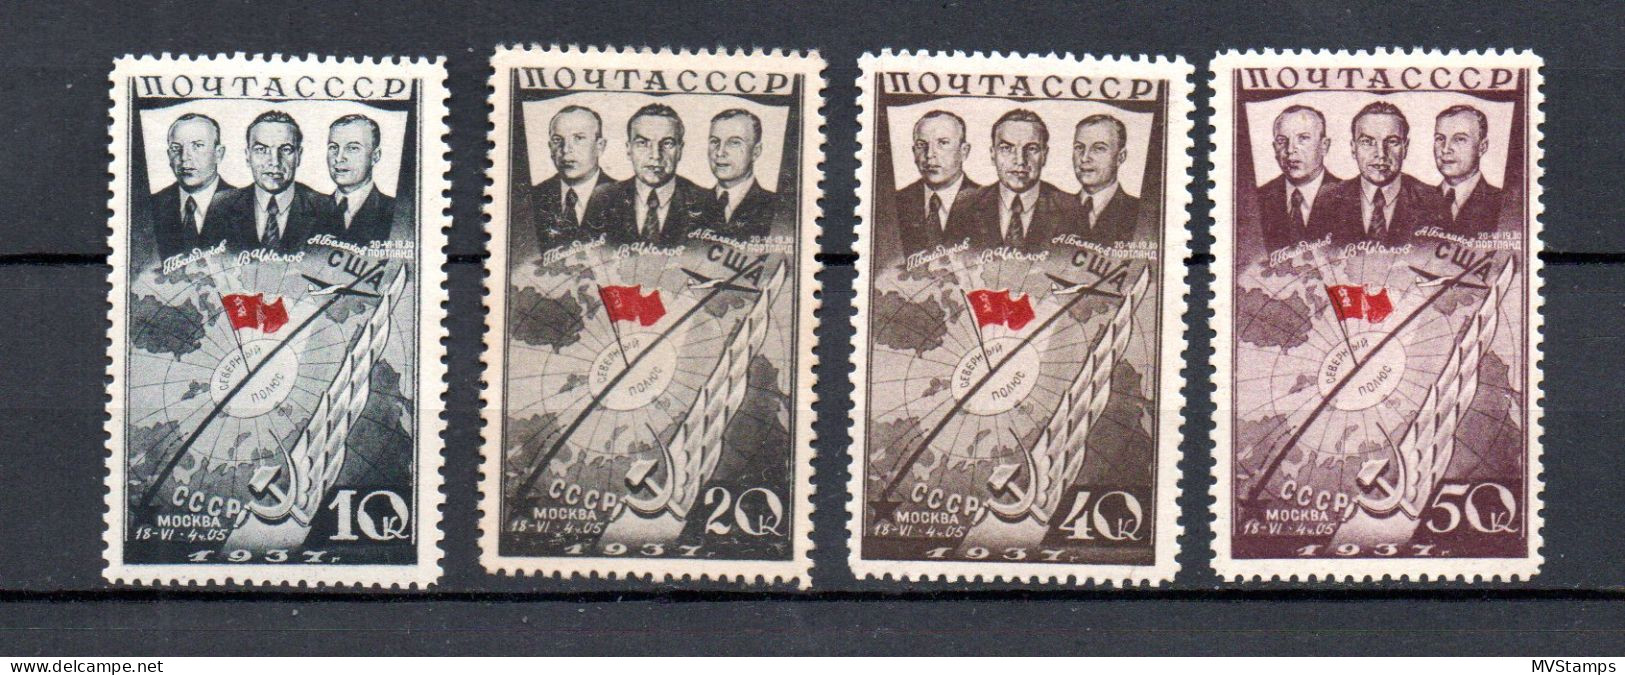 Russia 1938 Old Set Polar-Flight Moscow-Portland Stamps (Michel 595/98) Nice MLH - Unused Stamps